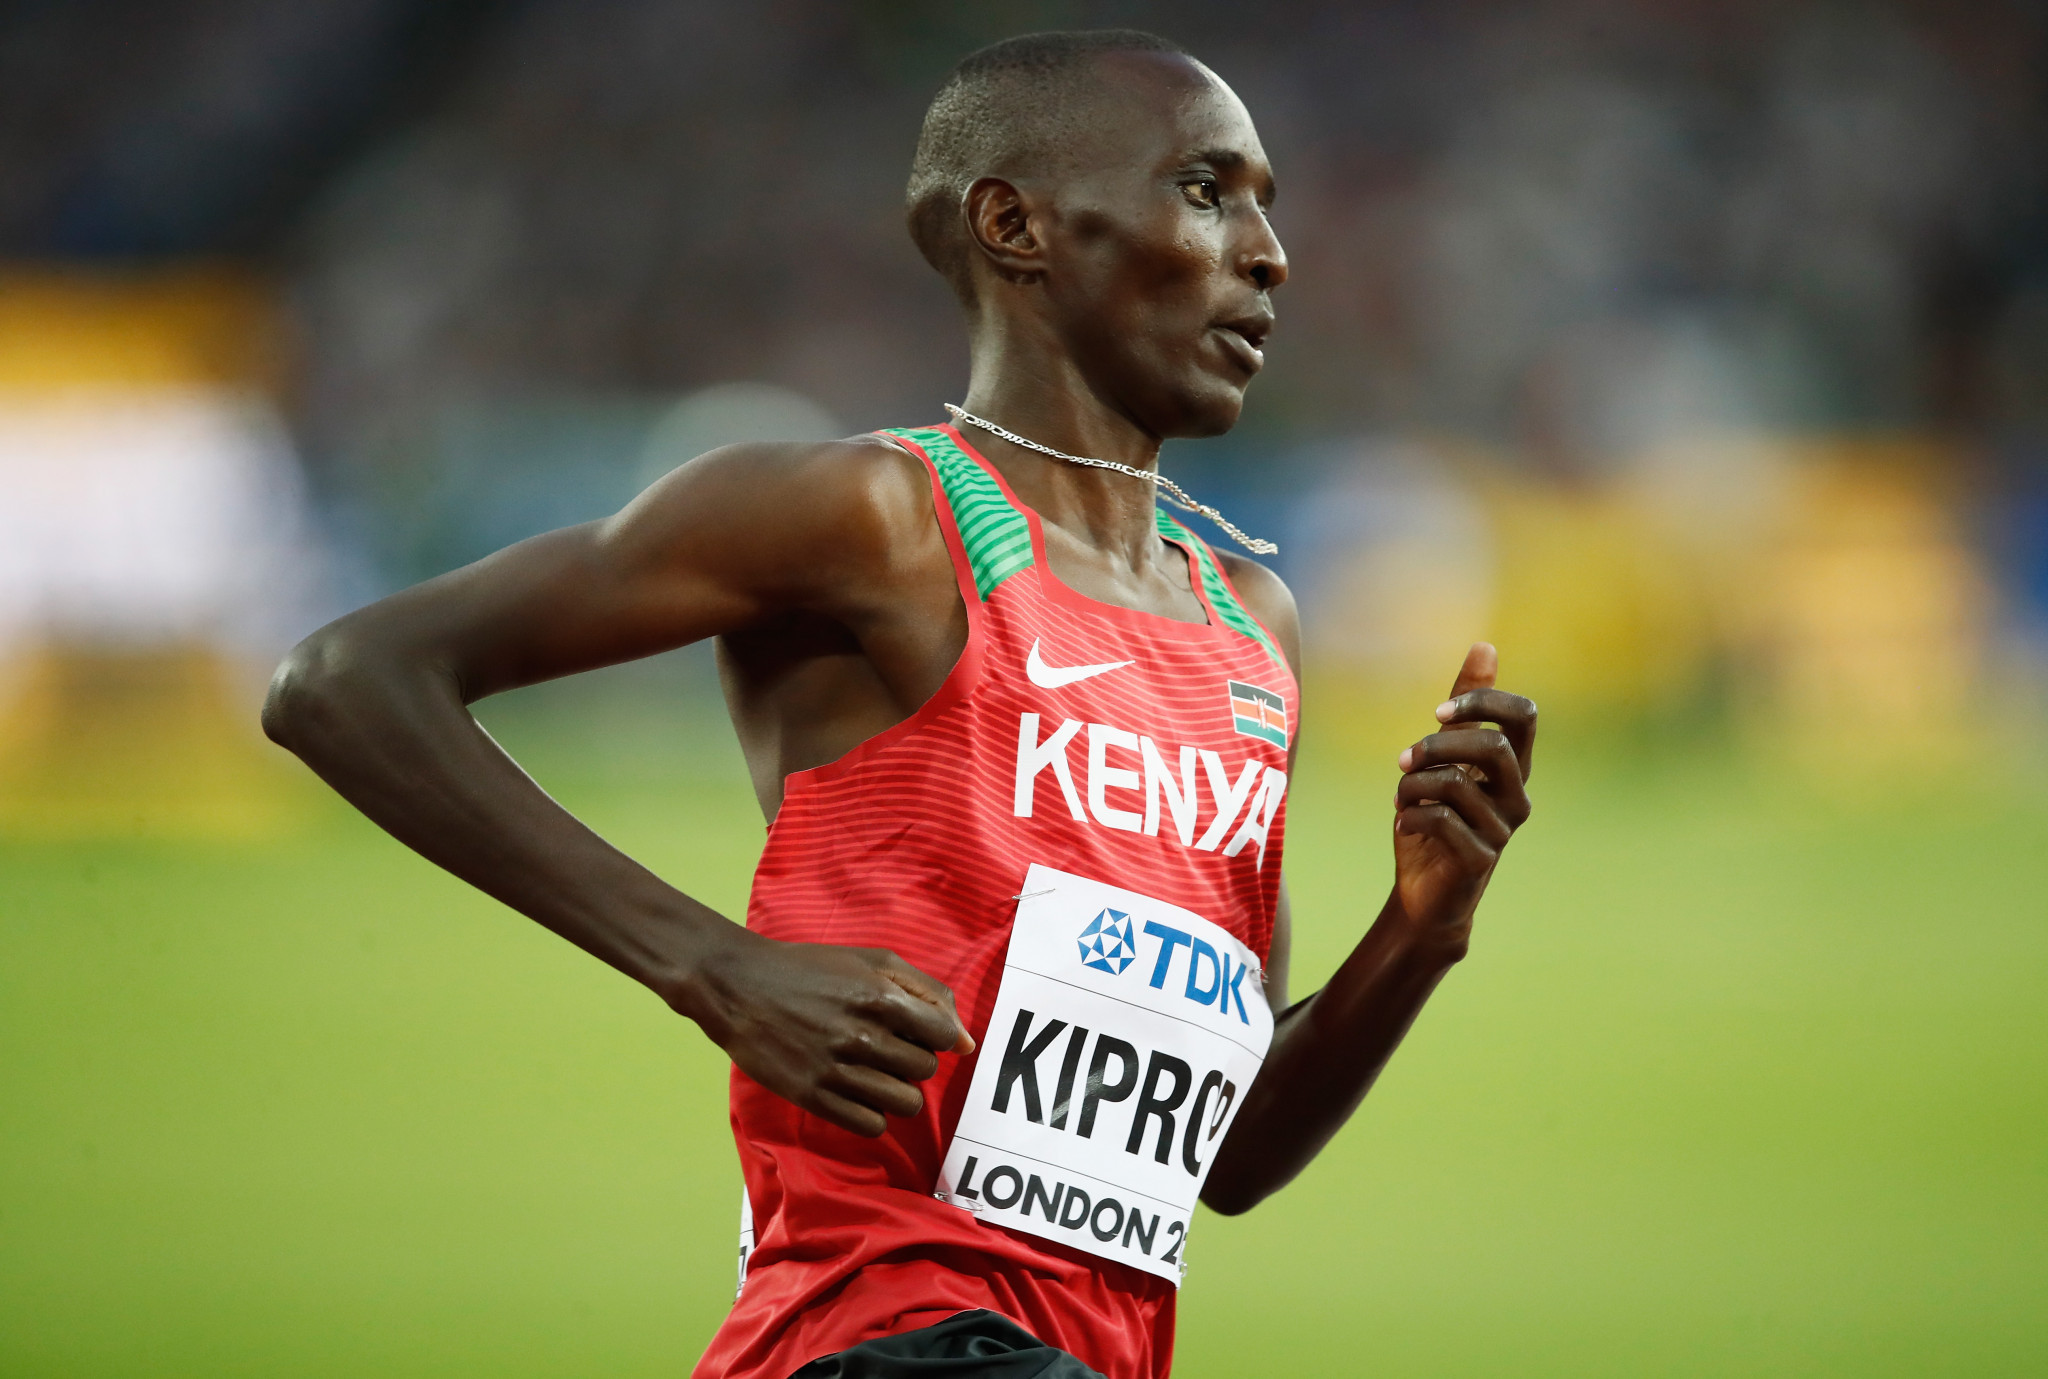 Kiprop gives up fight to prove innocence after positive test for EPO